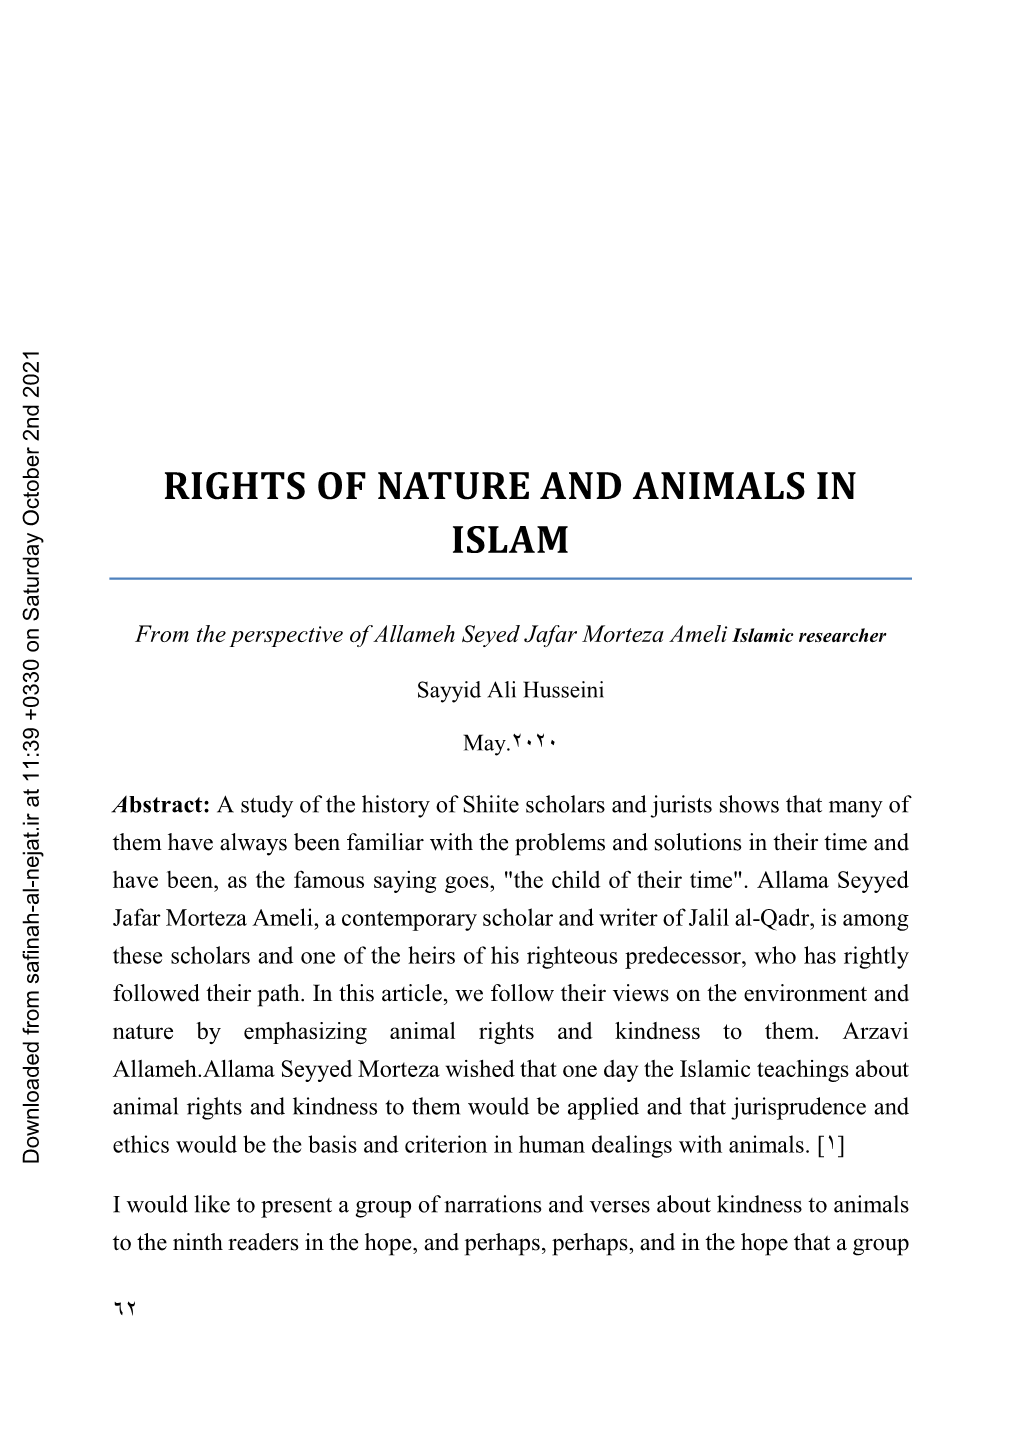 Rights of Nature and Animals in Islam